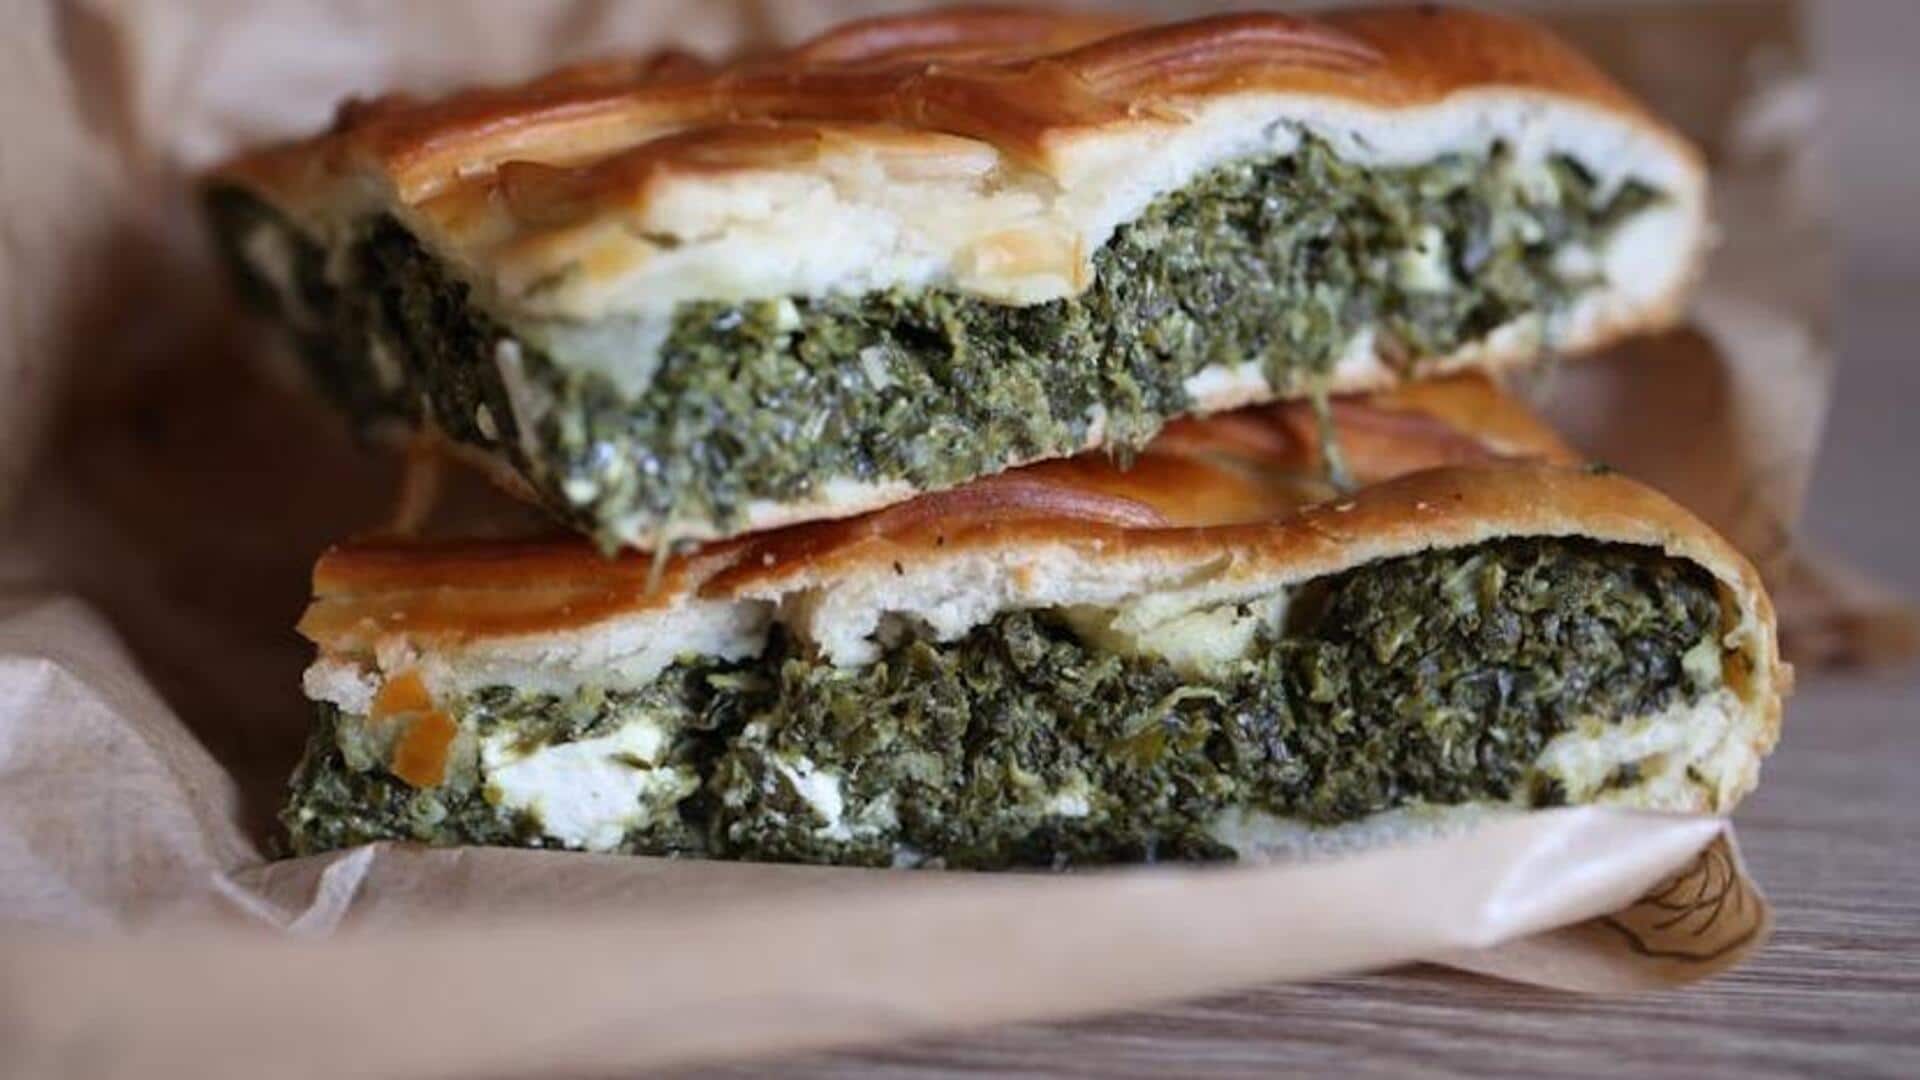 Gorge on these spinach delights from the Greek isles